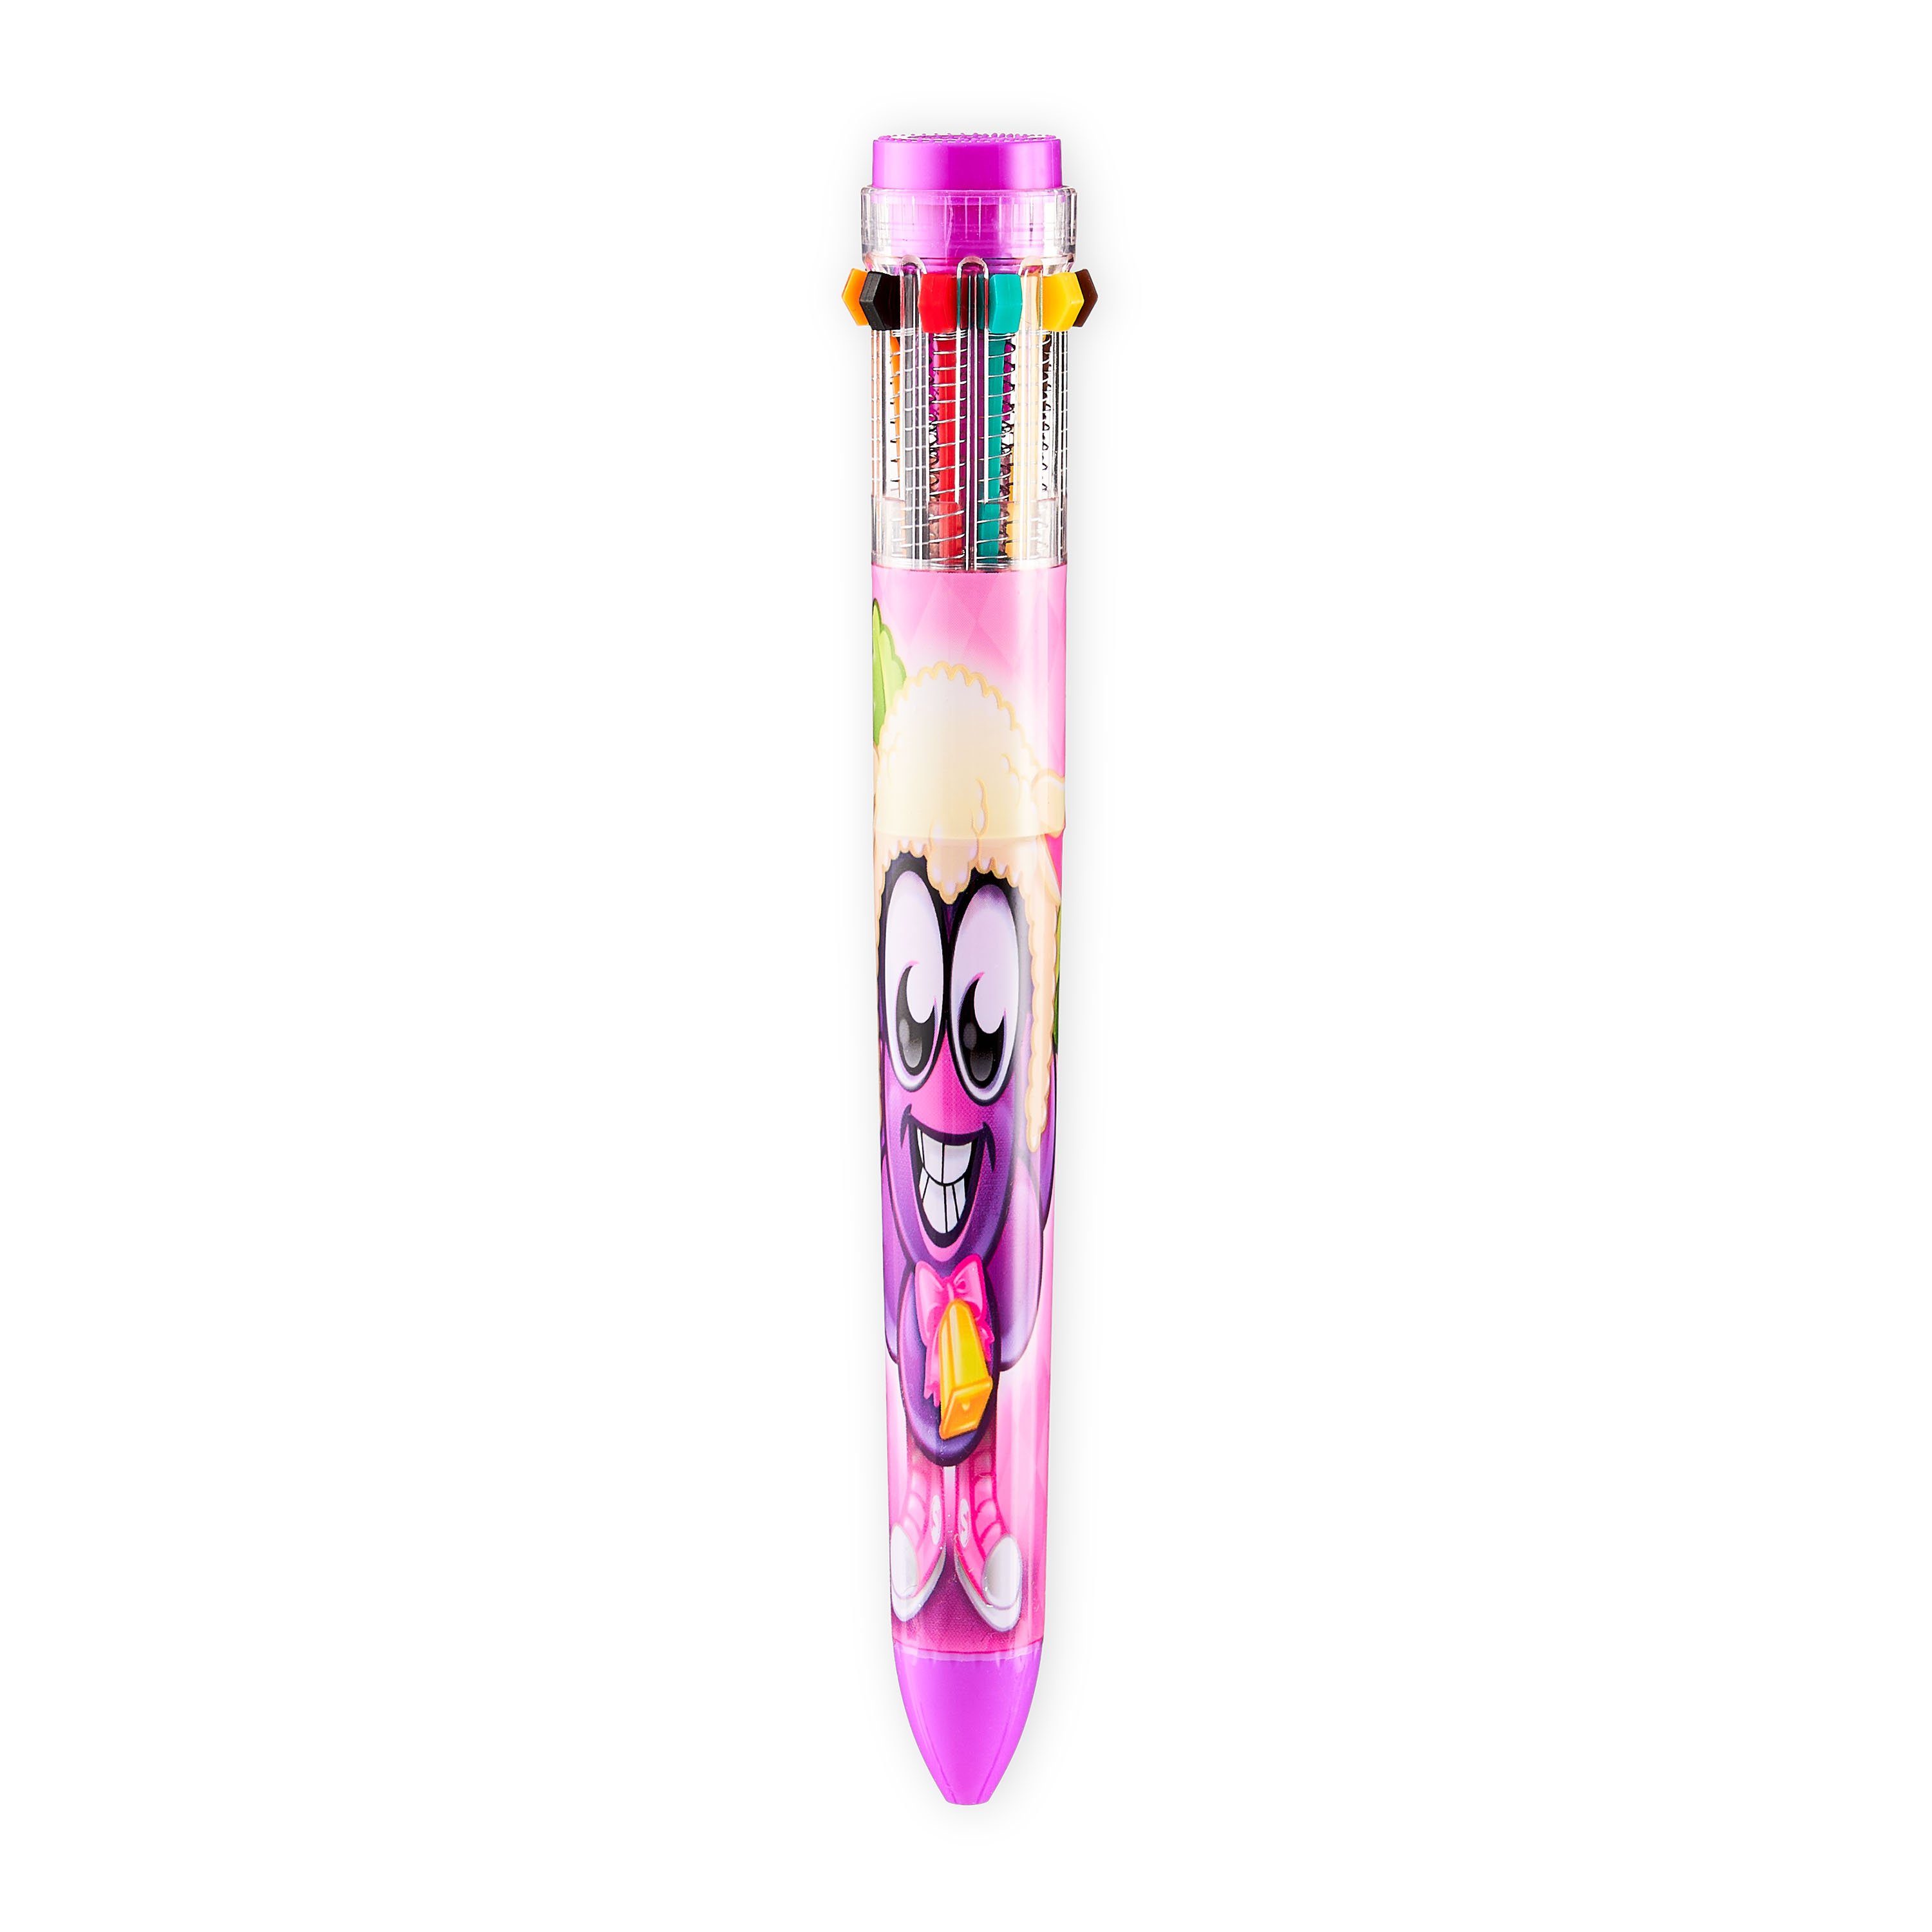 Scentos Easter Themed Scented Ballpoint Purple Rainbow Pen with 10 Colors - Ages 3+, Stationary & Stationary Sets - image 1 of 5